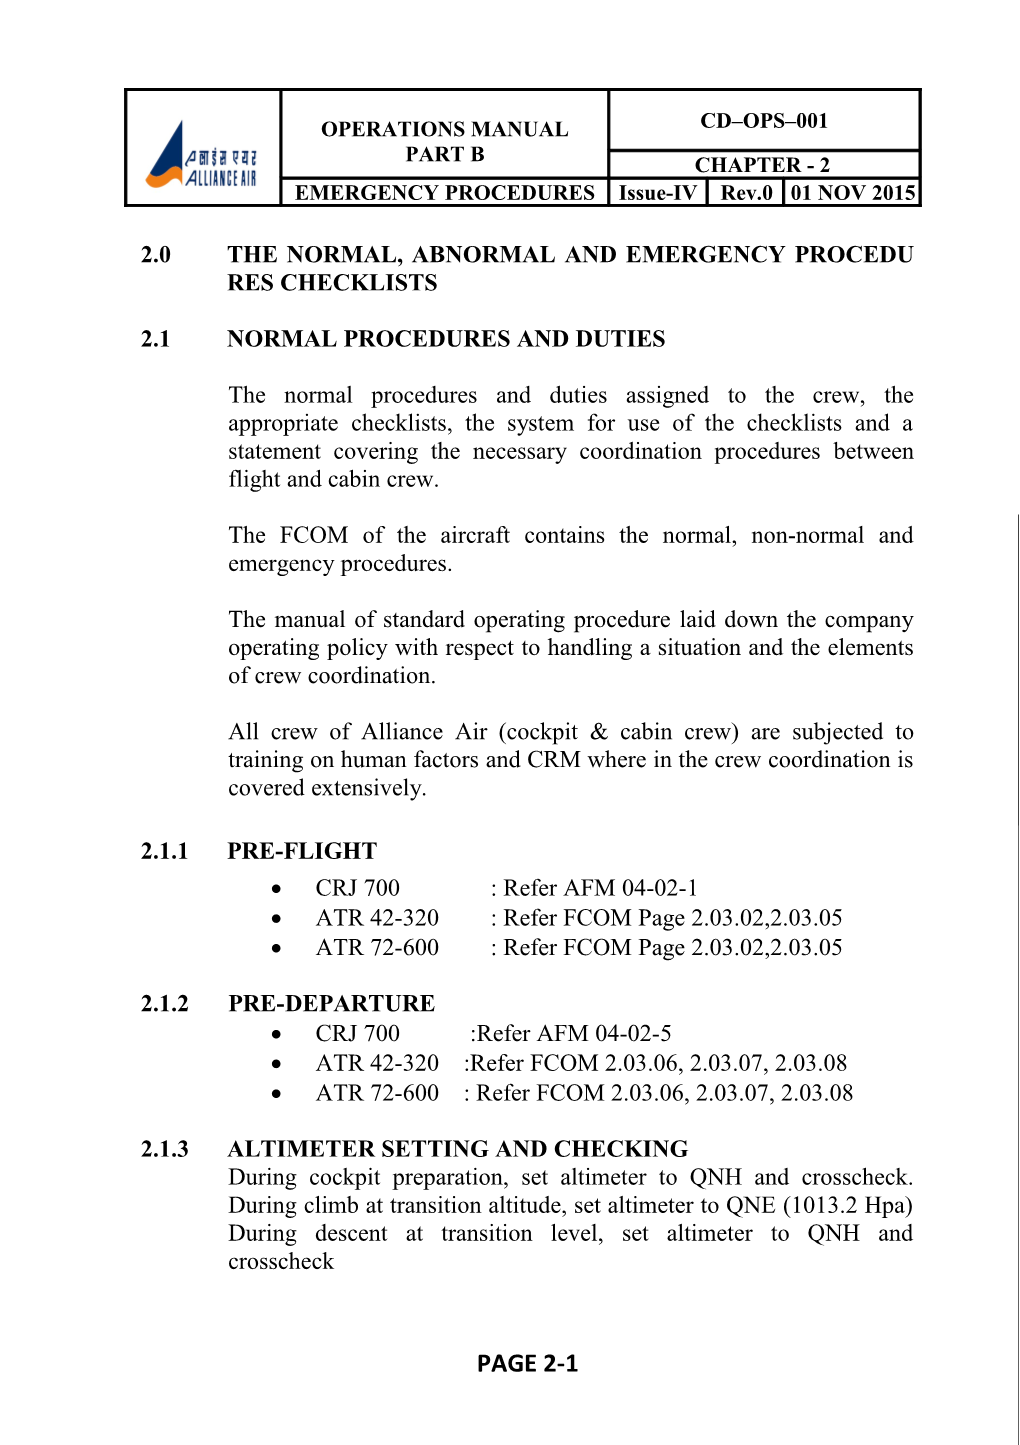 2.0 the Normal, Abnormal and Emergency Procedures Checklists